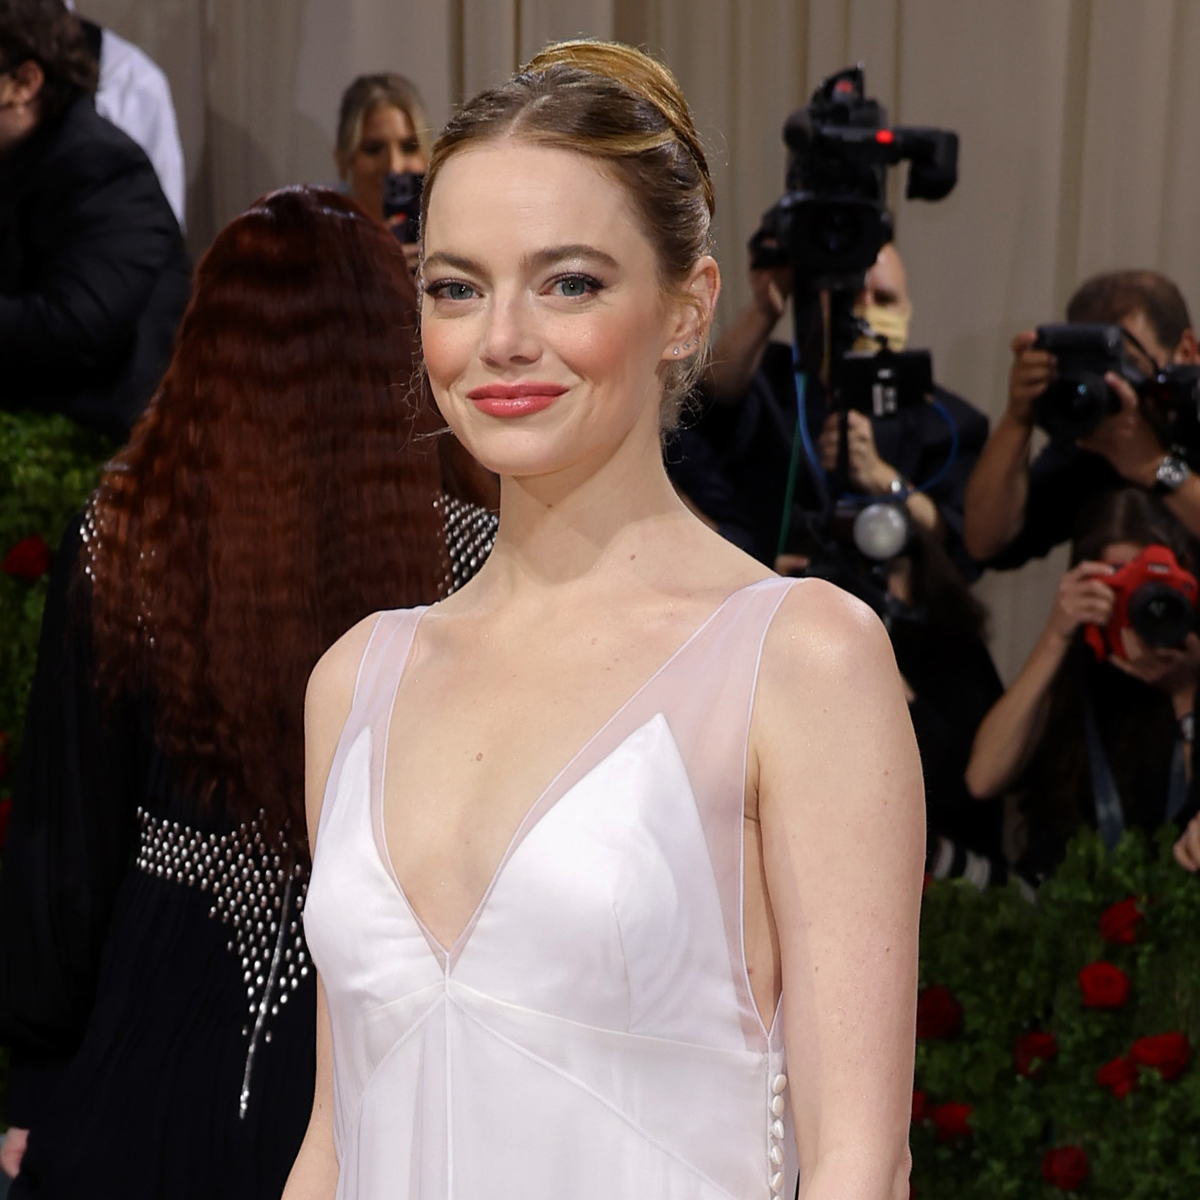 Emma Stone Is Unrecognizable With Darker 'Do and Fresh Tan at Met Gala